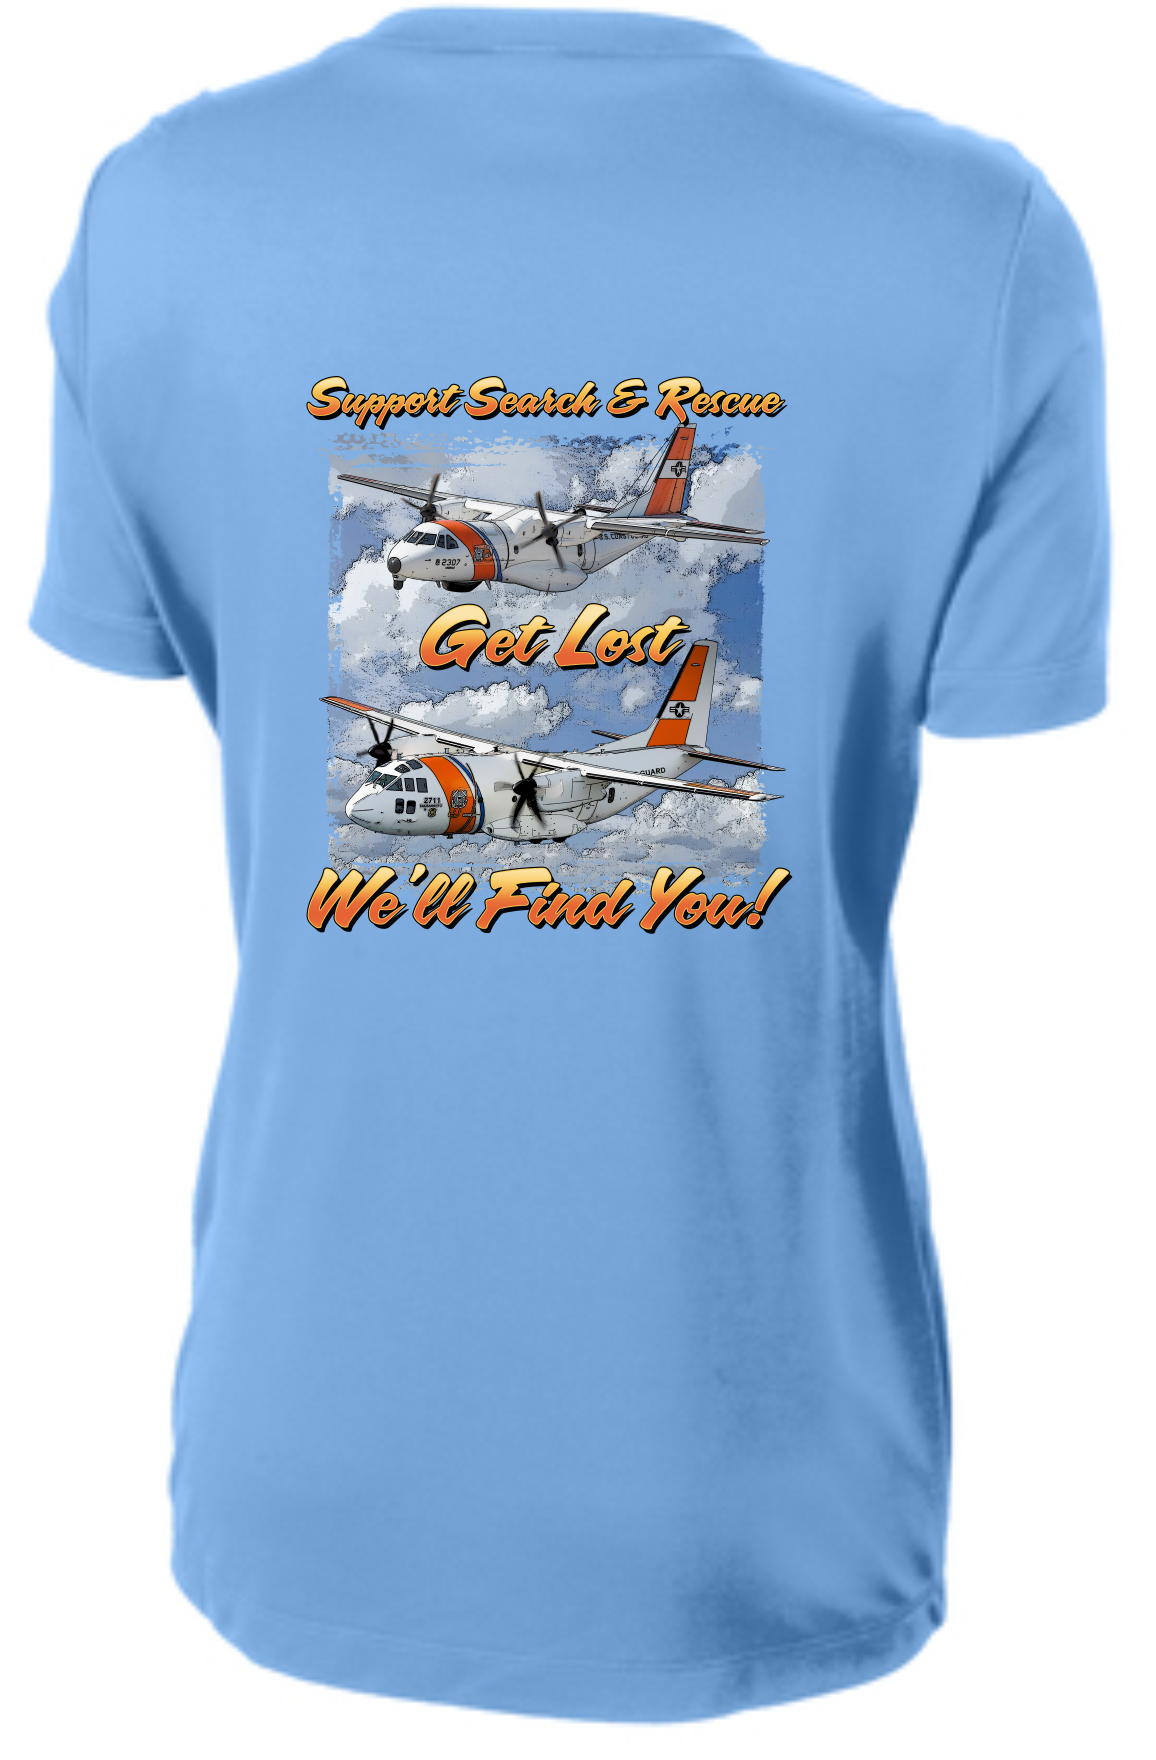 Ladies Search and Rescue Short Sleeve Tech Tshirt